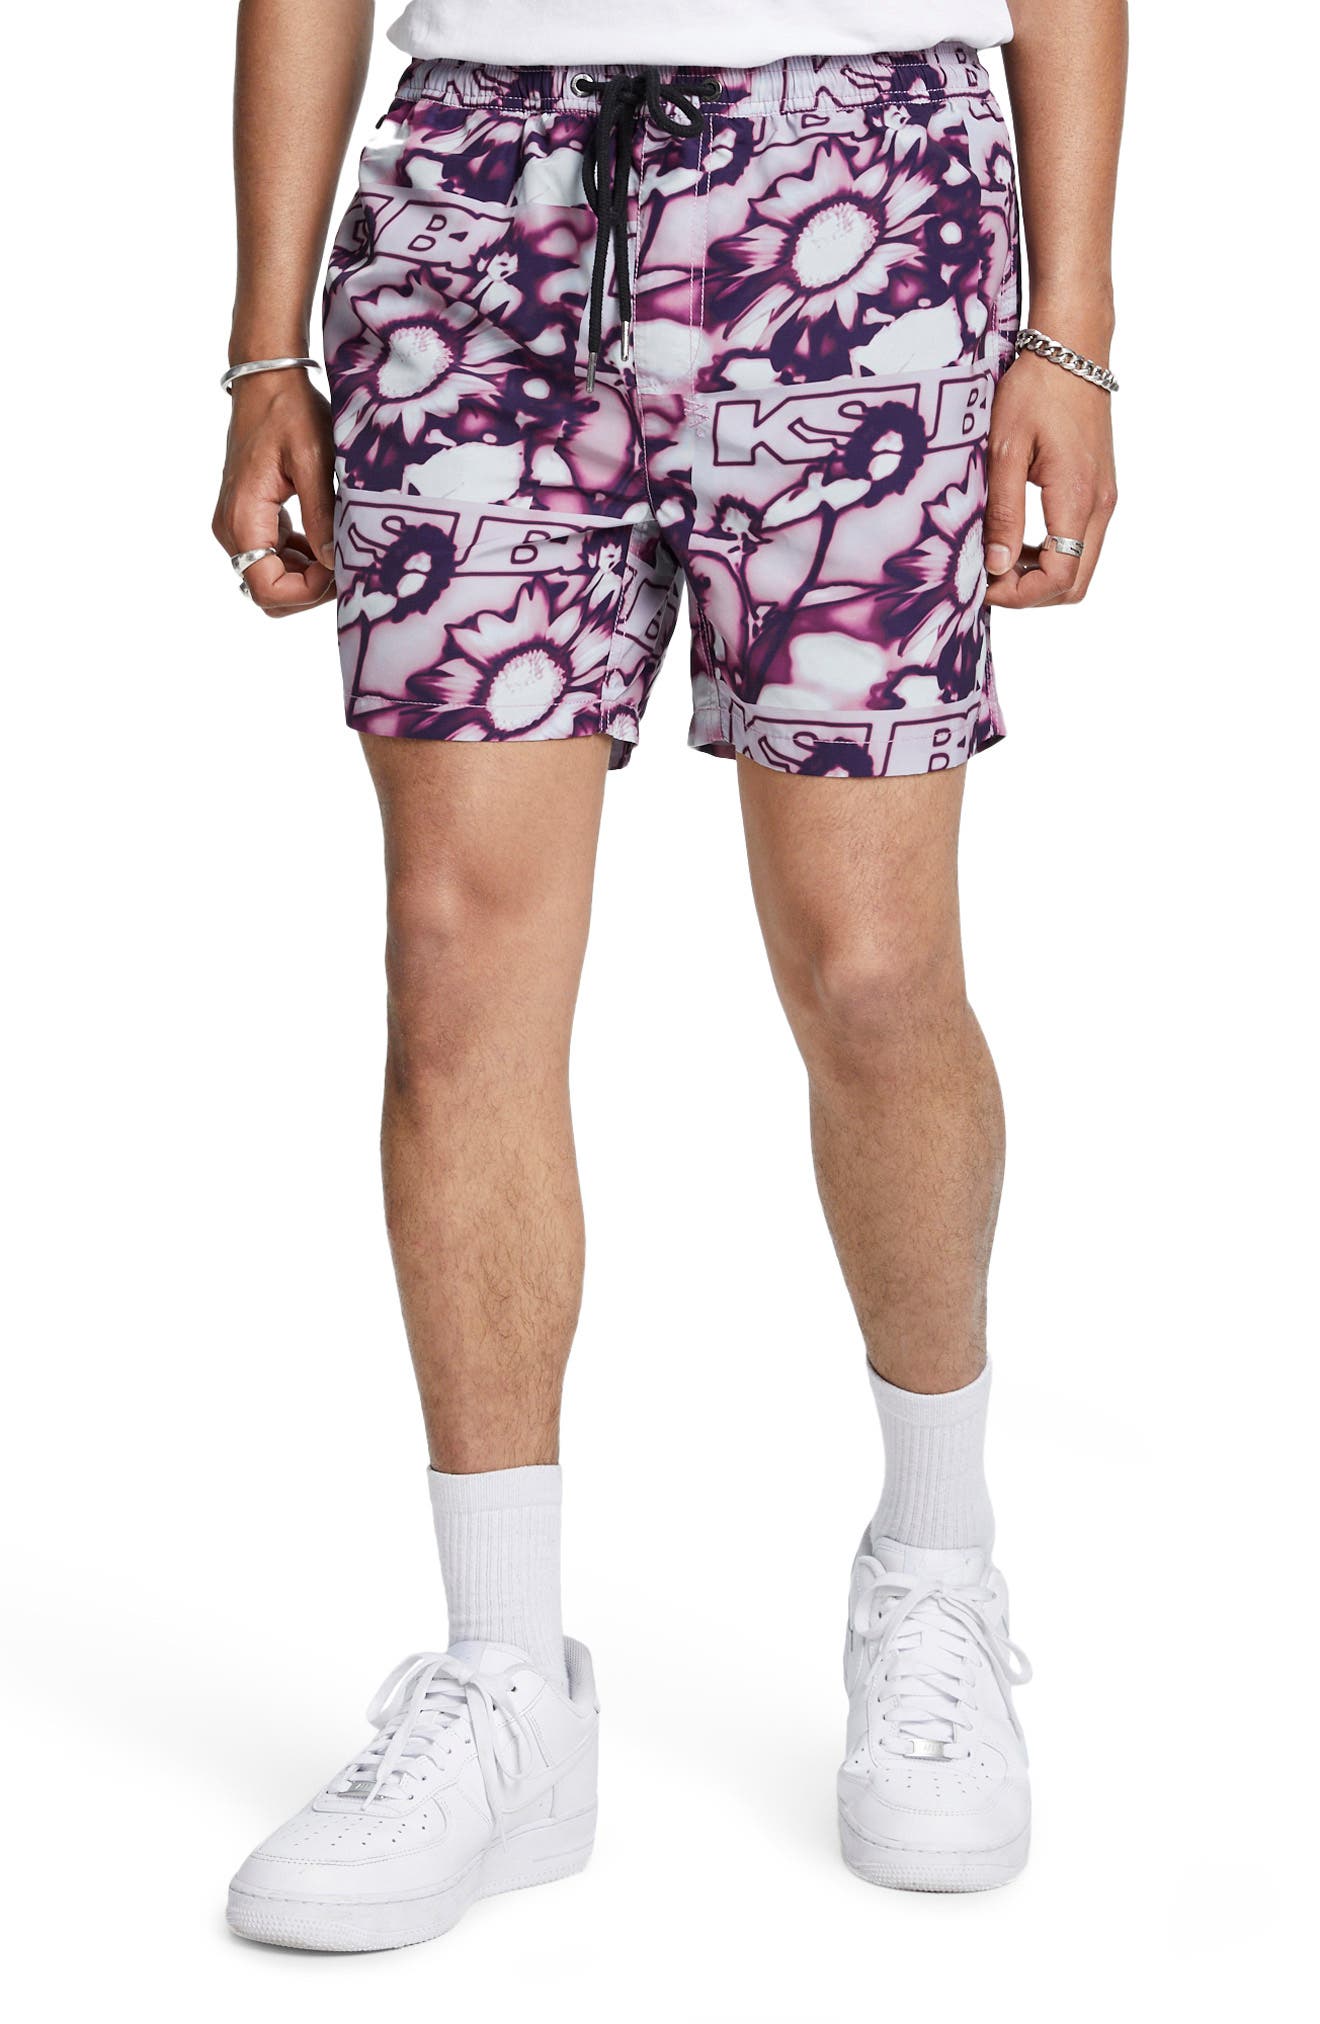 Ksubi UW Flower Ultra Board Shorts in Assorted at Nordstrom, Size Small